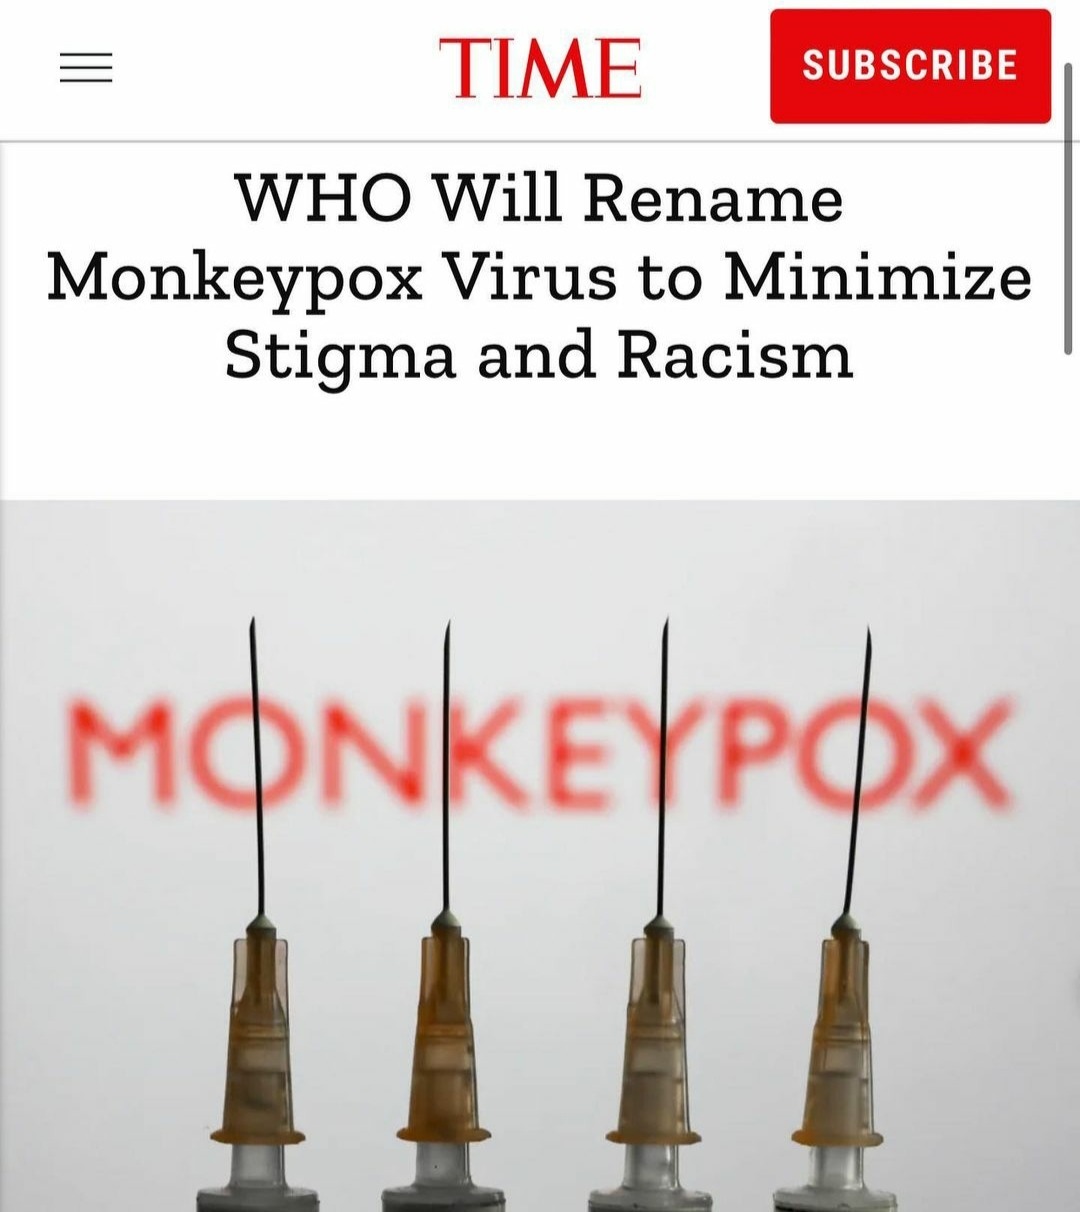 They literally think they are monkeys lmao - meme